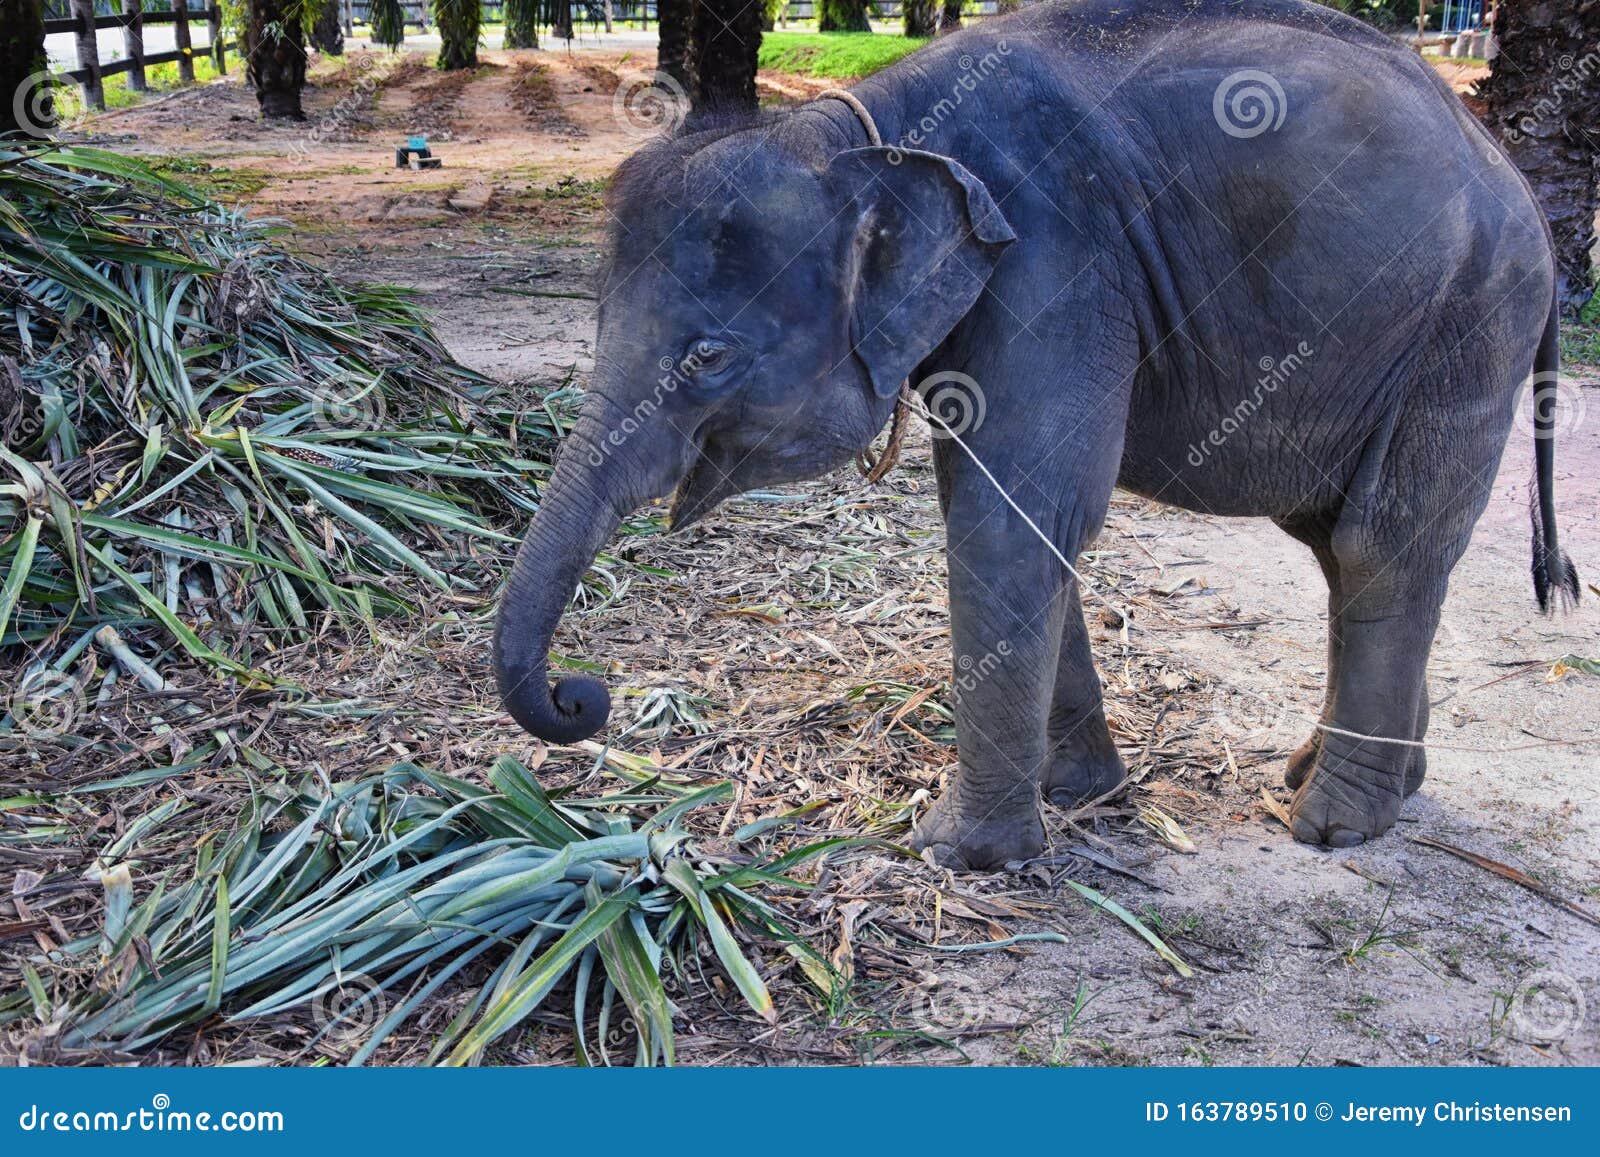 baby elephant, elephas maximus, rescued, healing to be reintroduced into the wild, close up view in protected park, herbivorous an